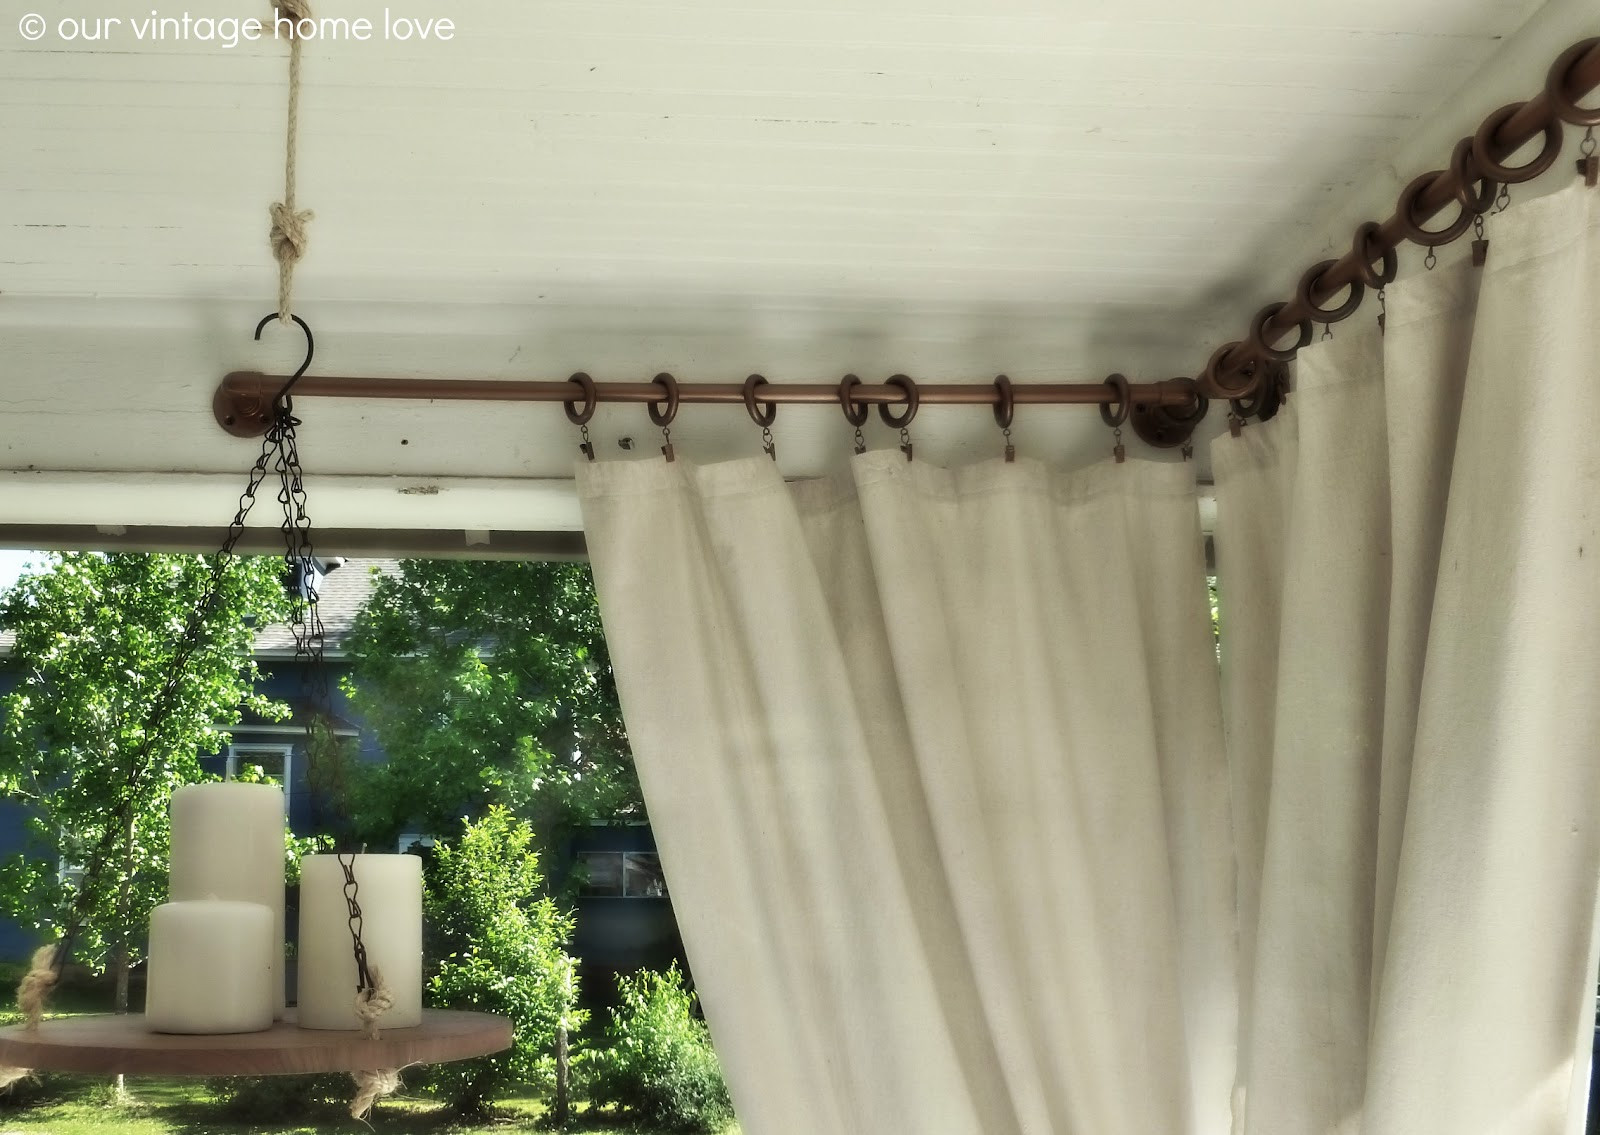 DIY Outdoor Curtain Rod
 vintage home love Back Side Porch Ideas For Summer and An